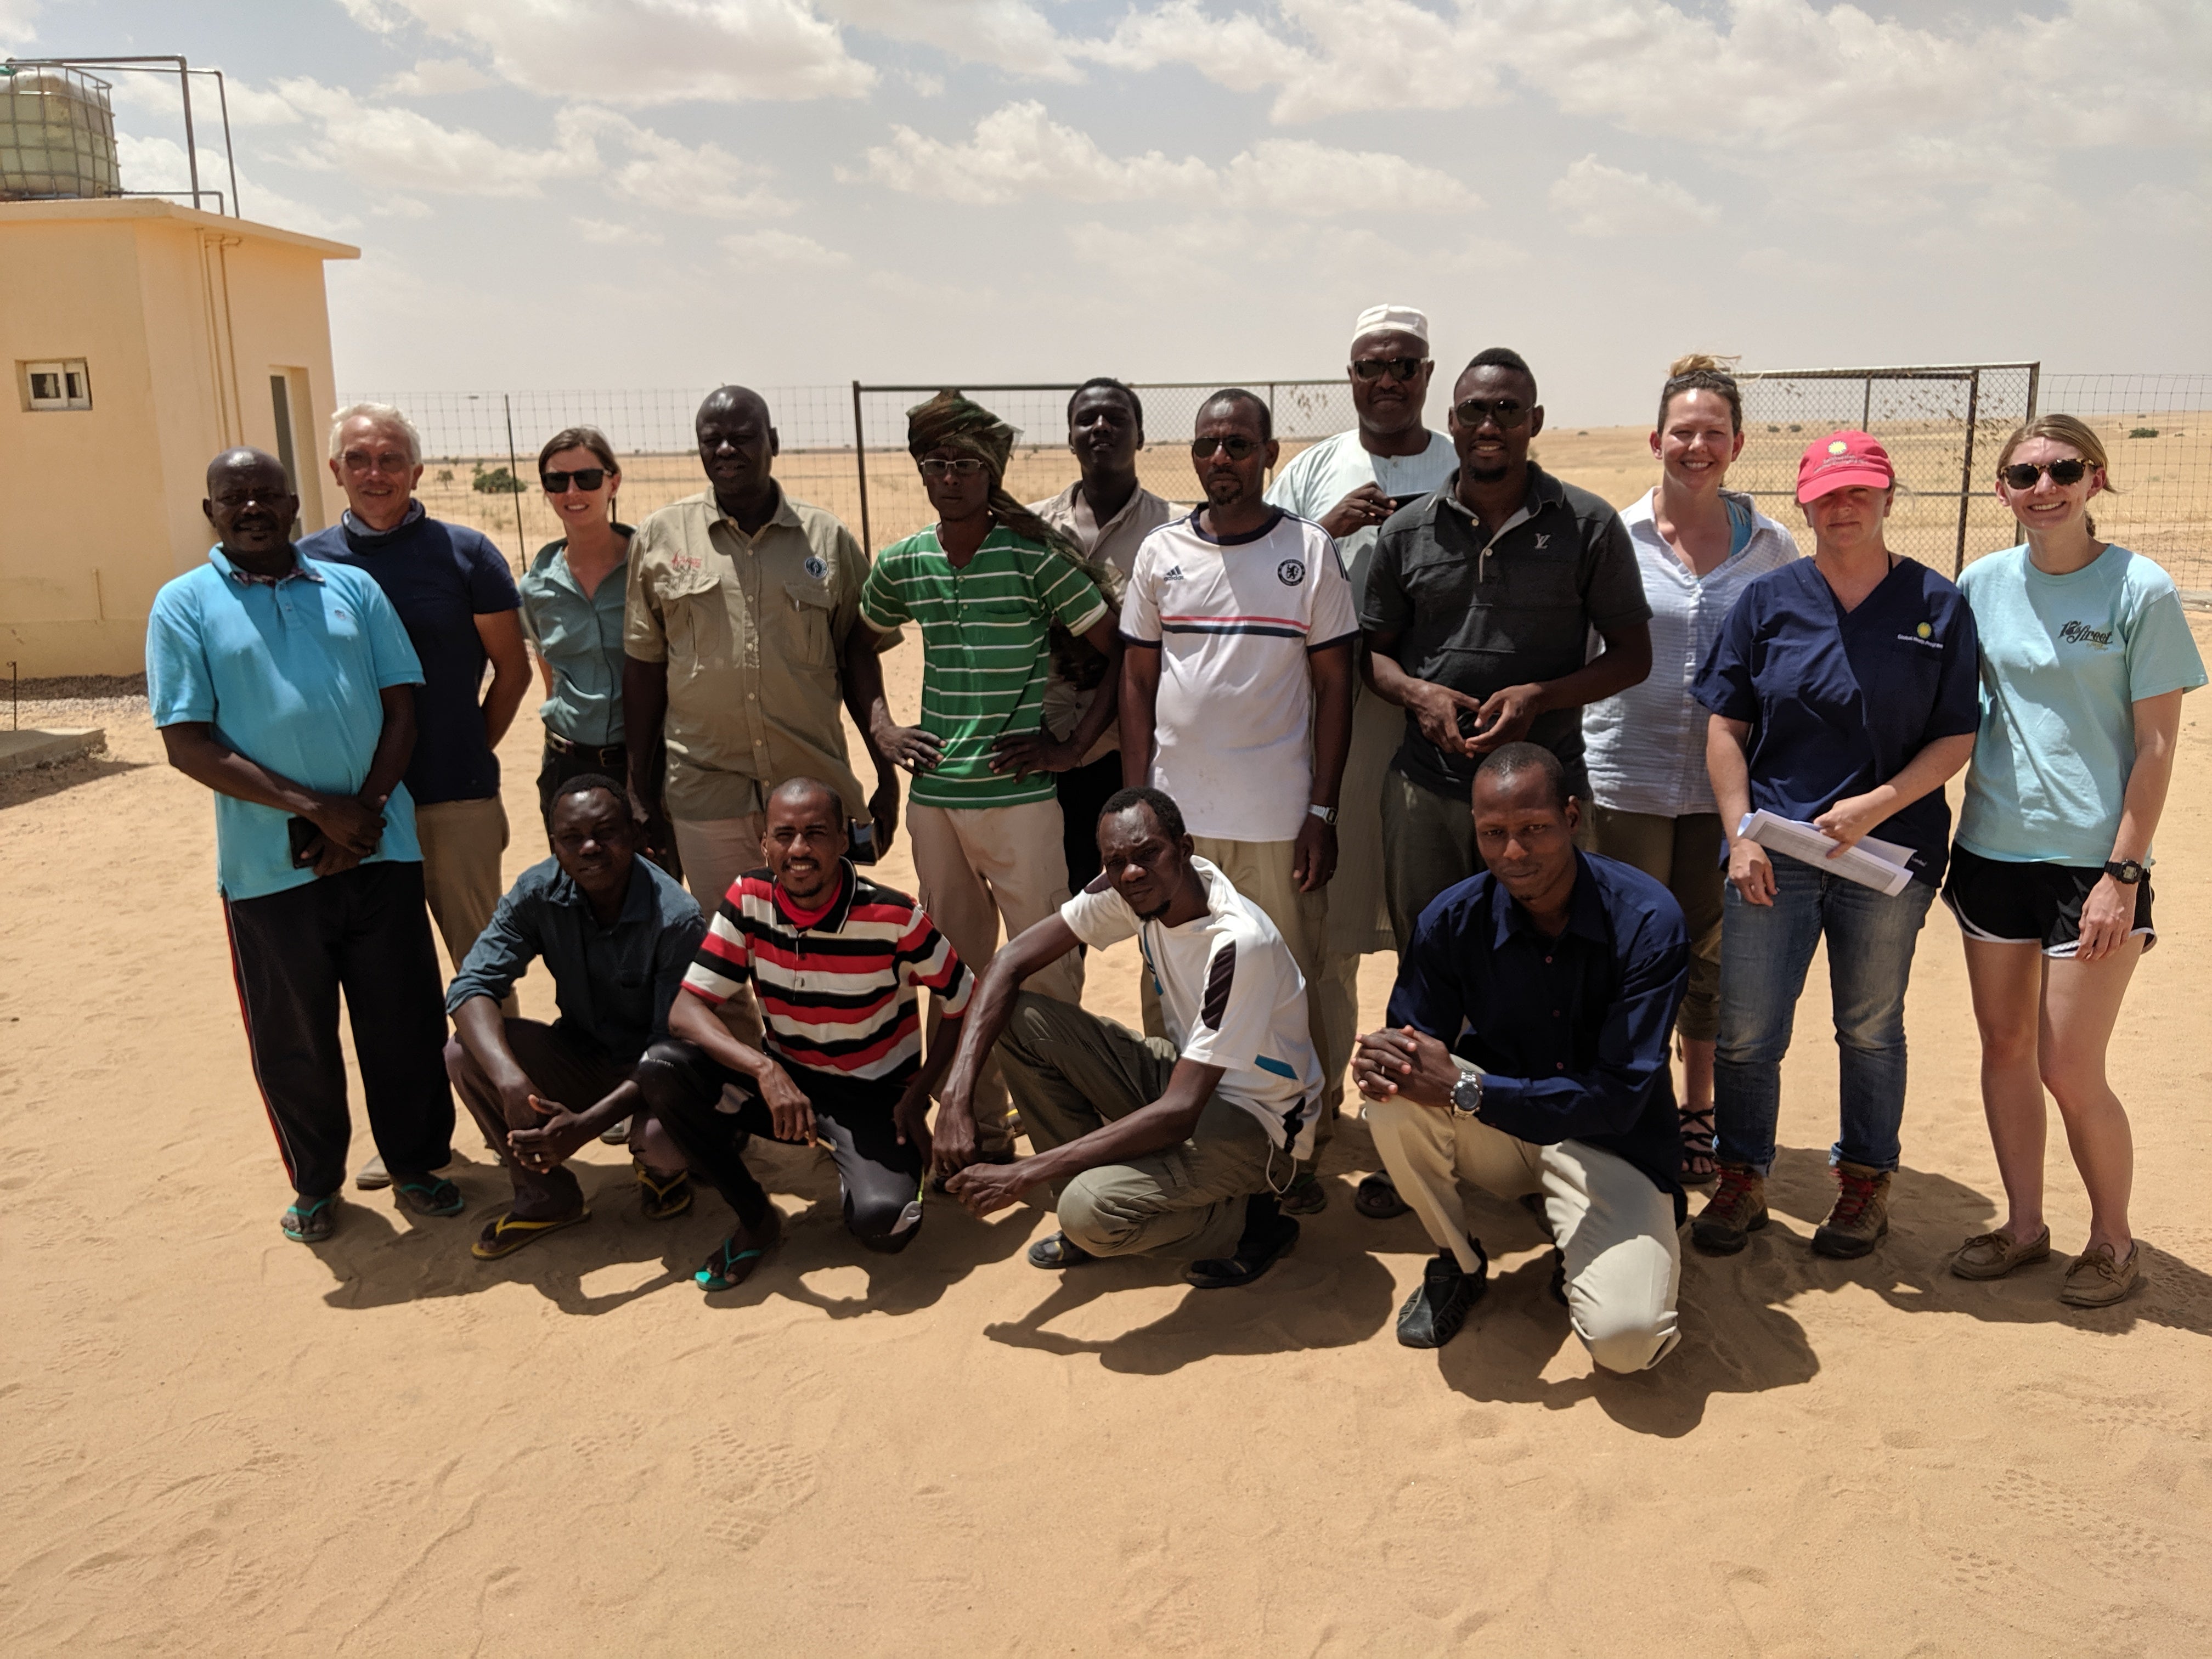 A group of students and teachers from a pathology workshop held in Chad pose together for a photo